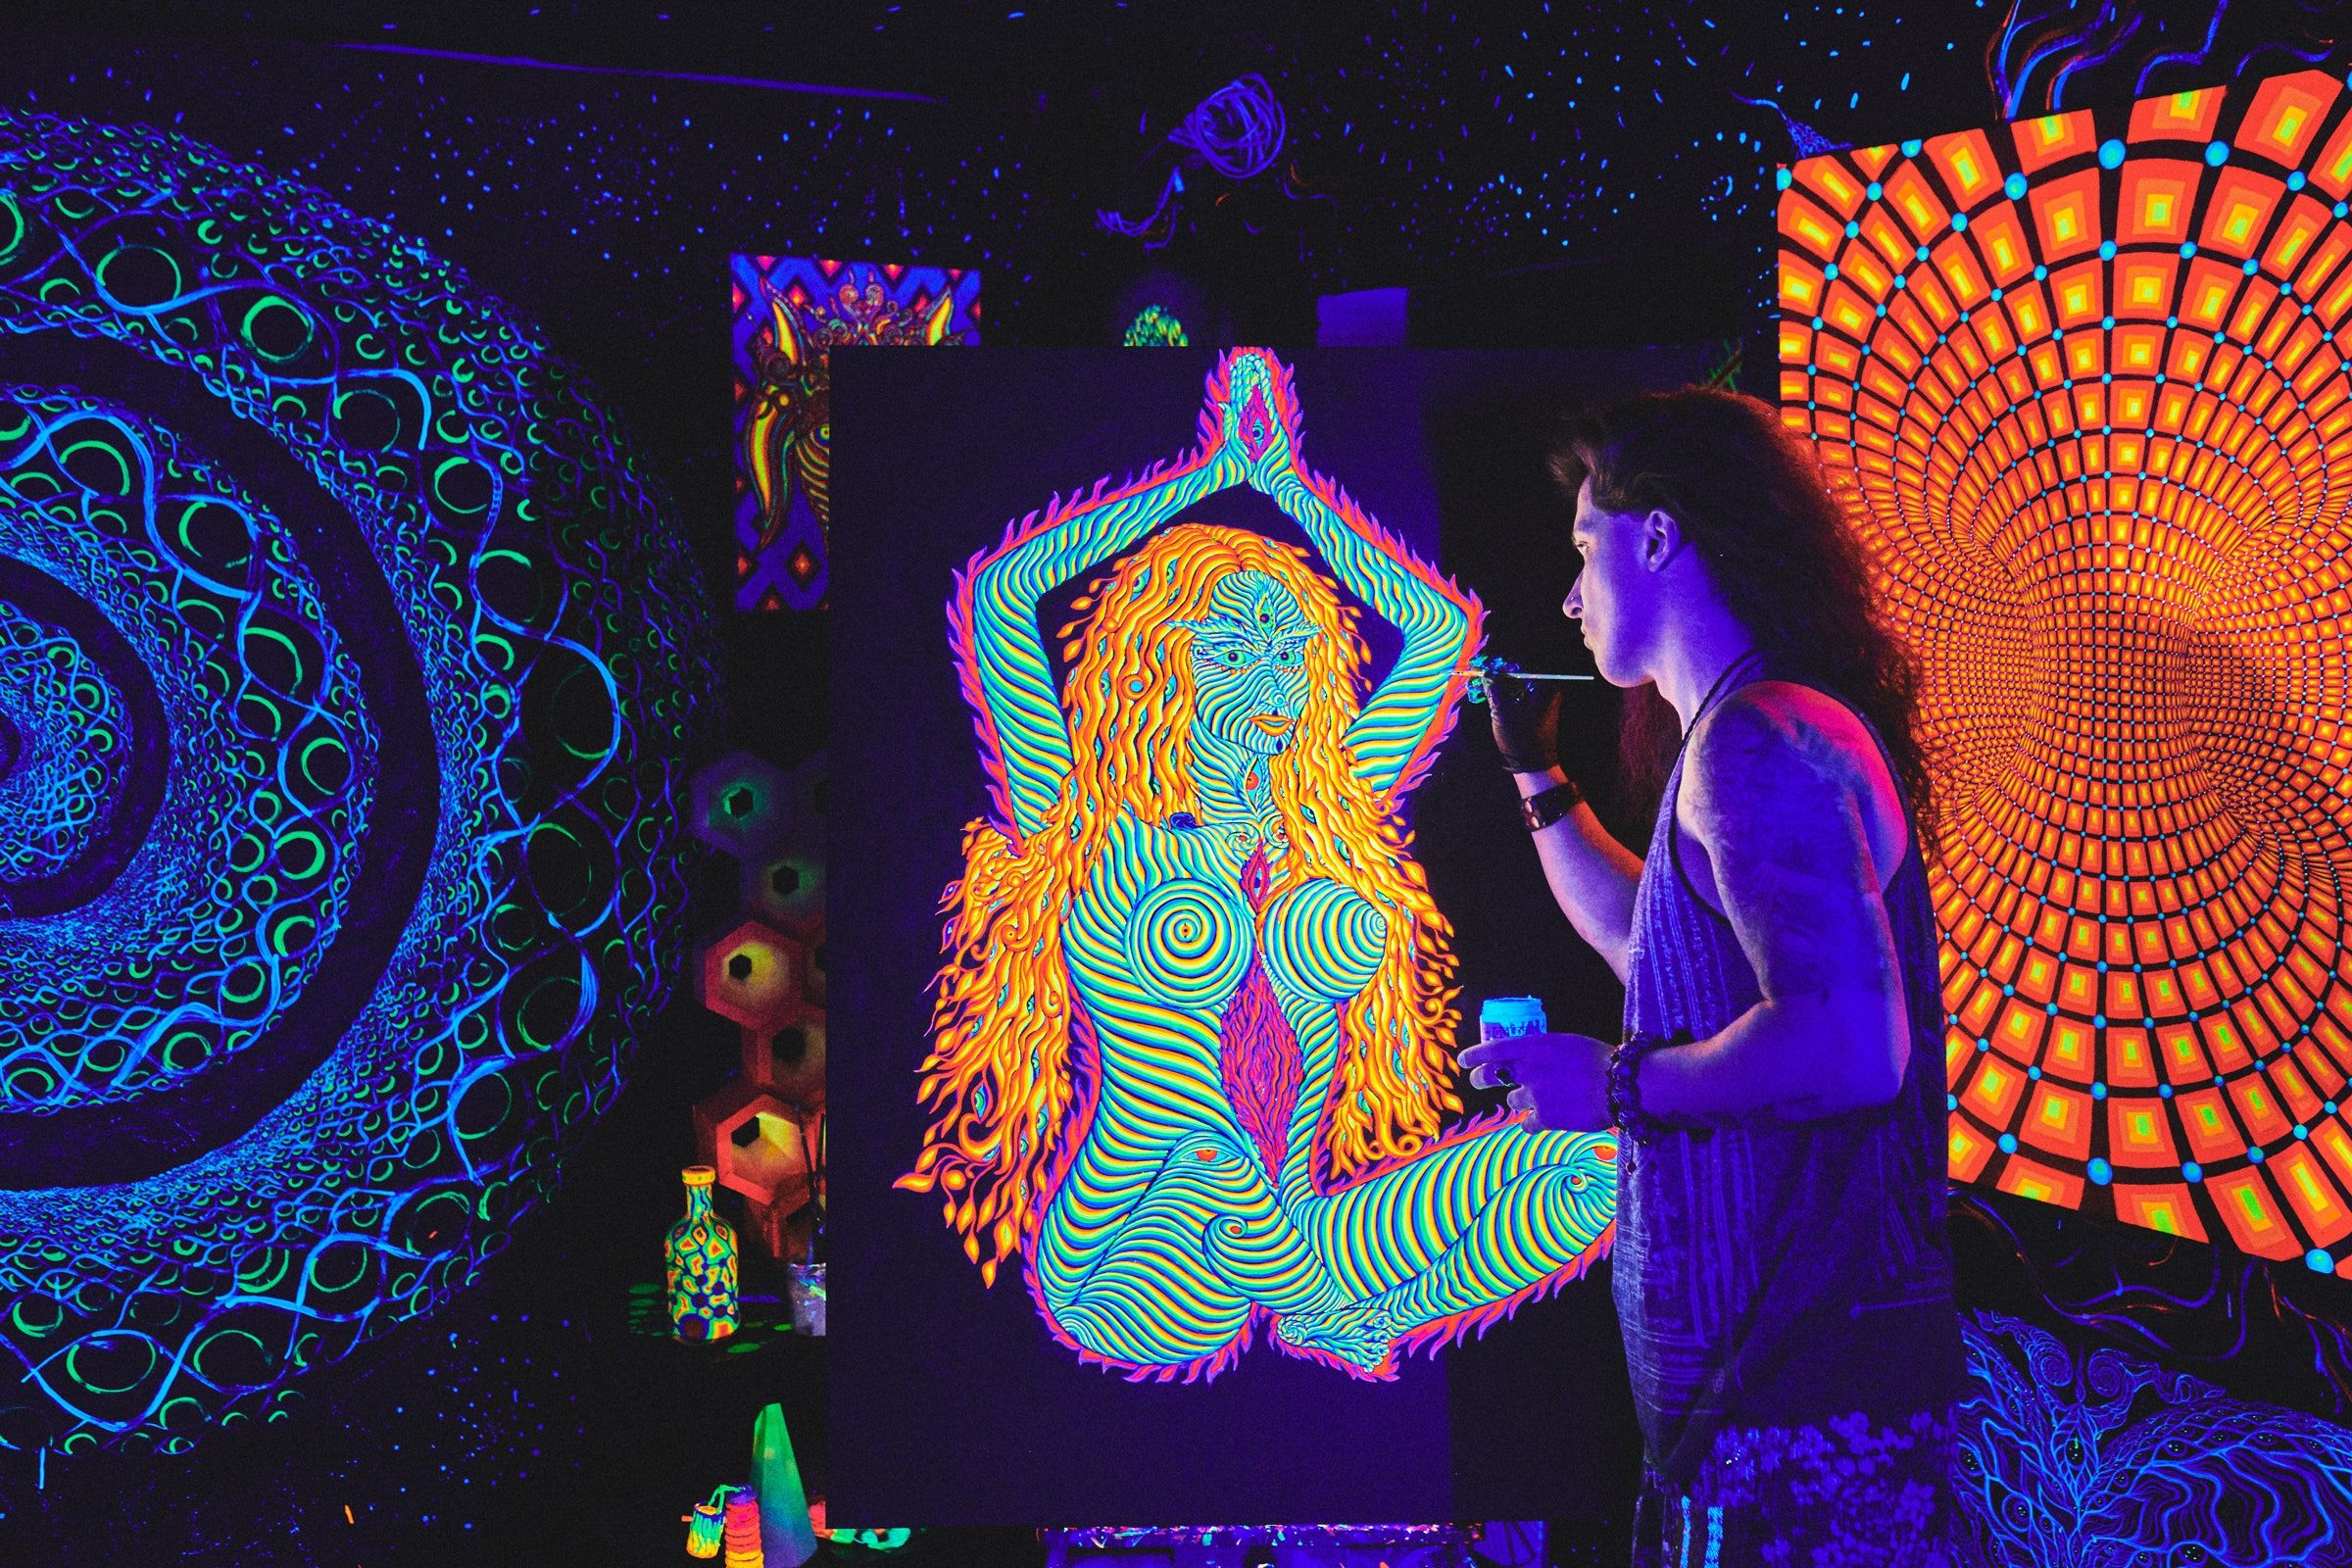 The Cosmic, Psychedelic, Glow In The Dark Art Of Alex Aliume | Wired With Regard To Cosmic Sound Wall Art (View 14 of 15)